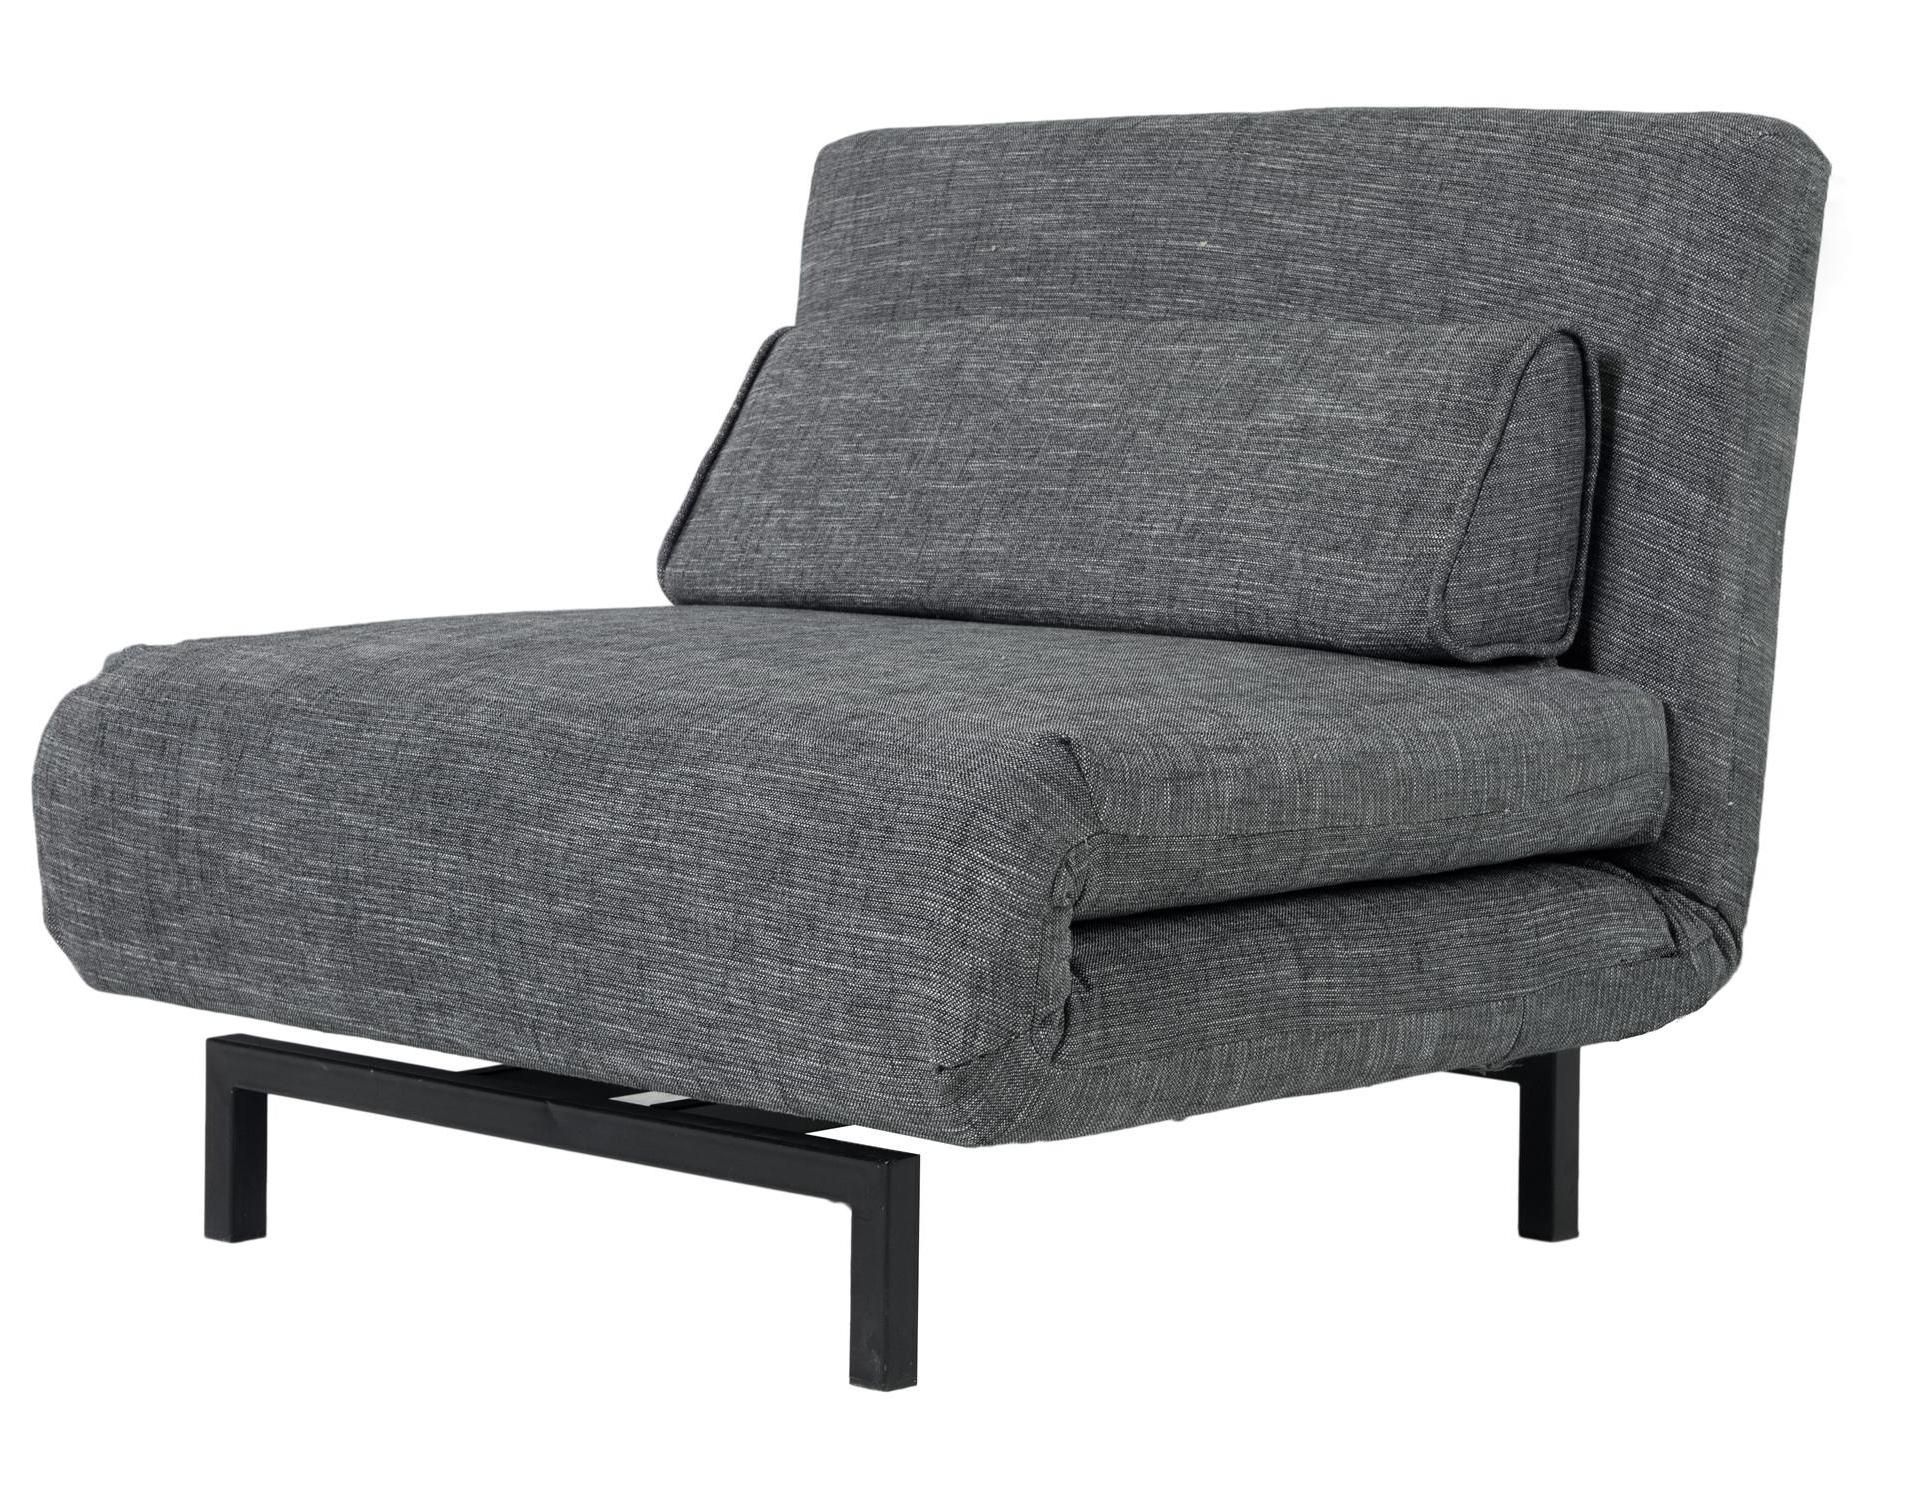 Chair Futon Chair Sleeper Roselawnlutheran Single Sofa Bed Nz With Regard To Single Sofa Bed Chairs (View 5 of 20)